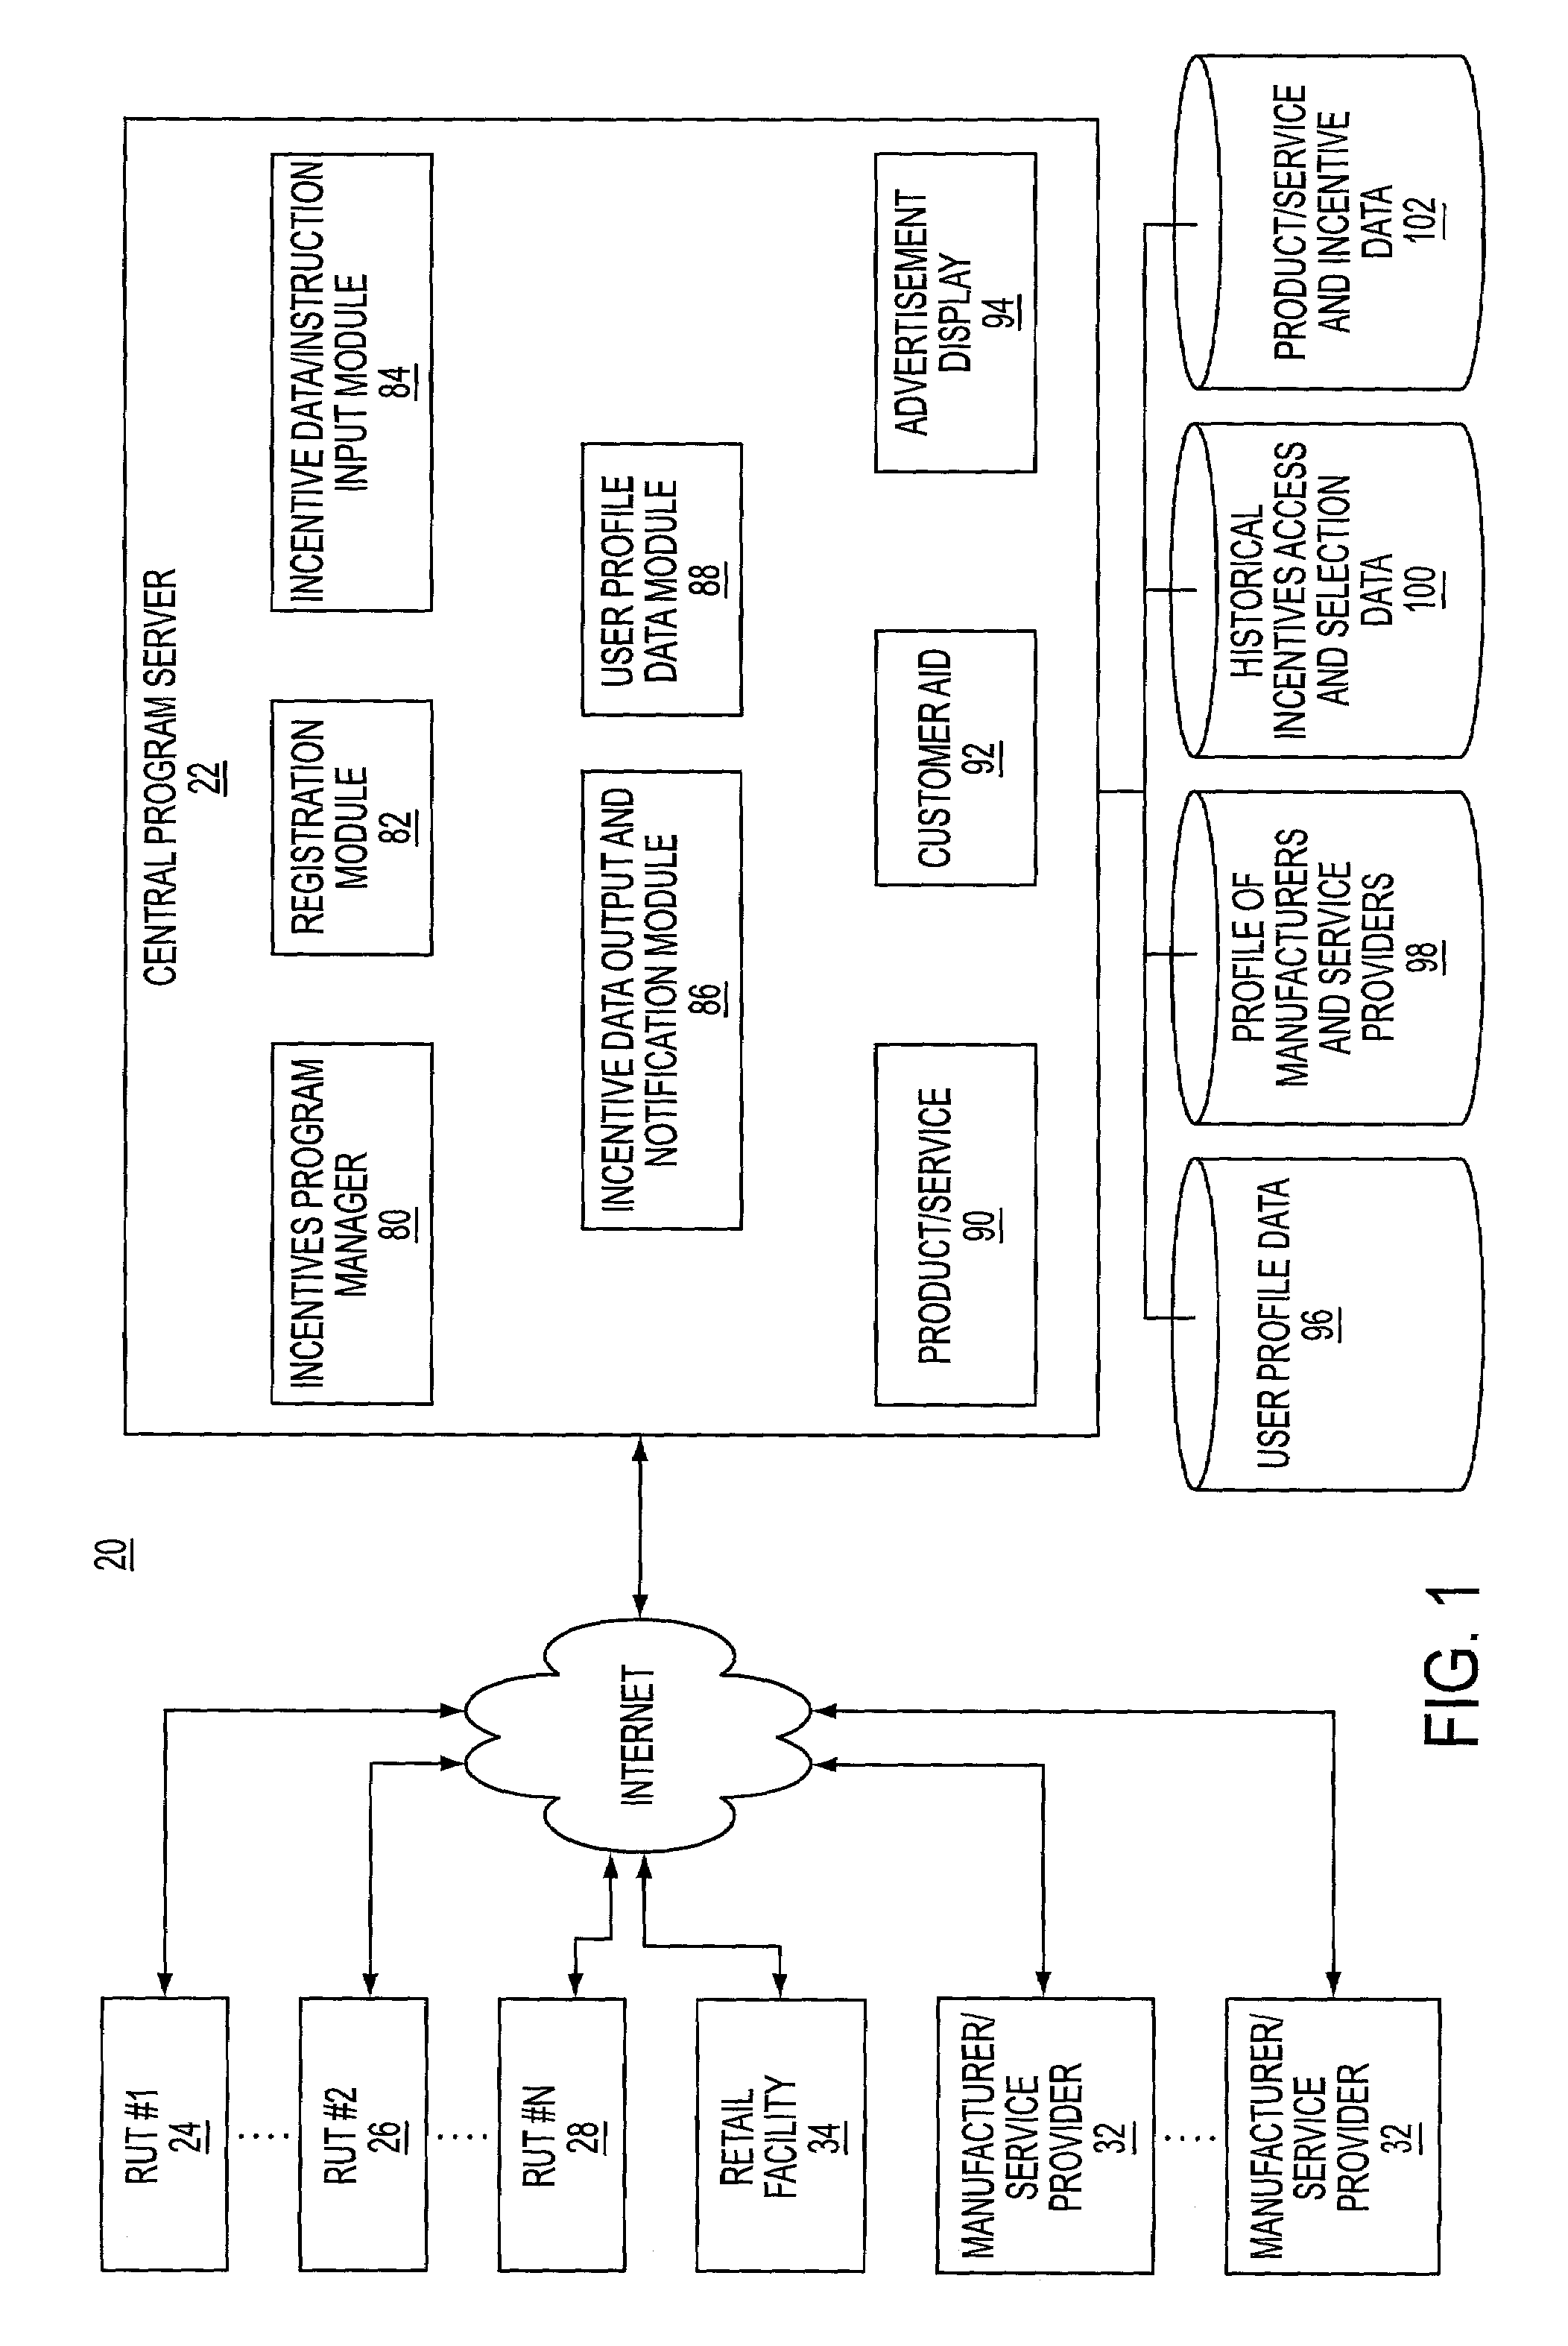 System and method for providing incentives to purchasers